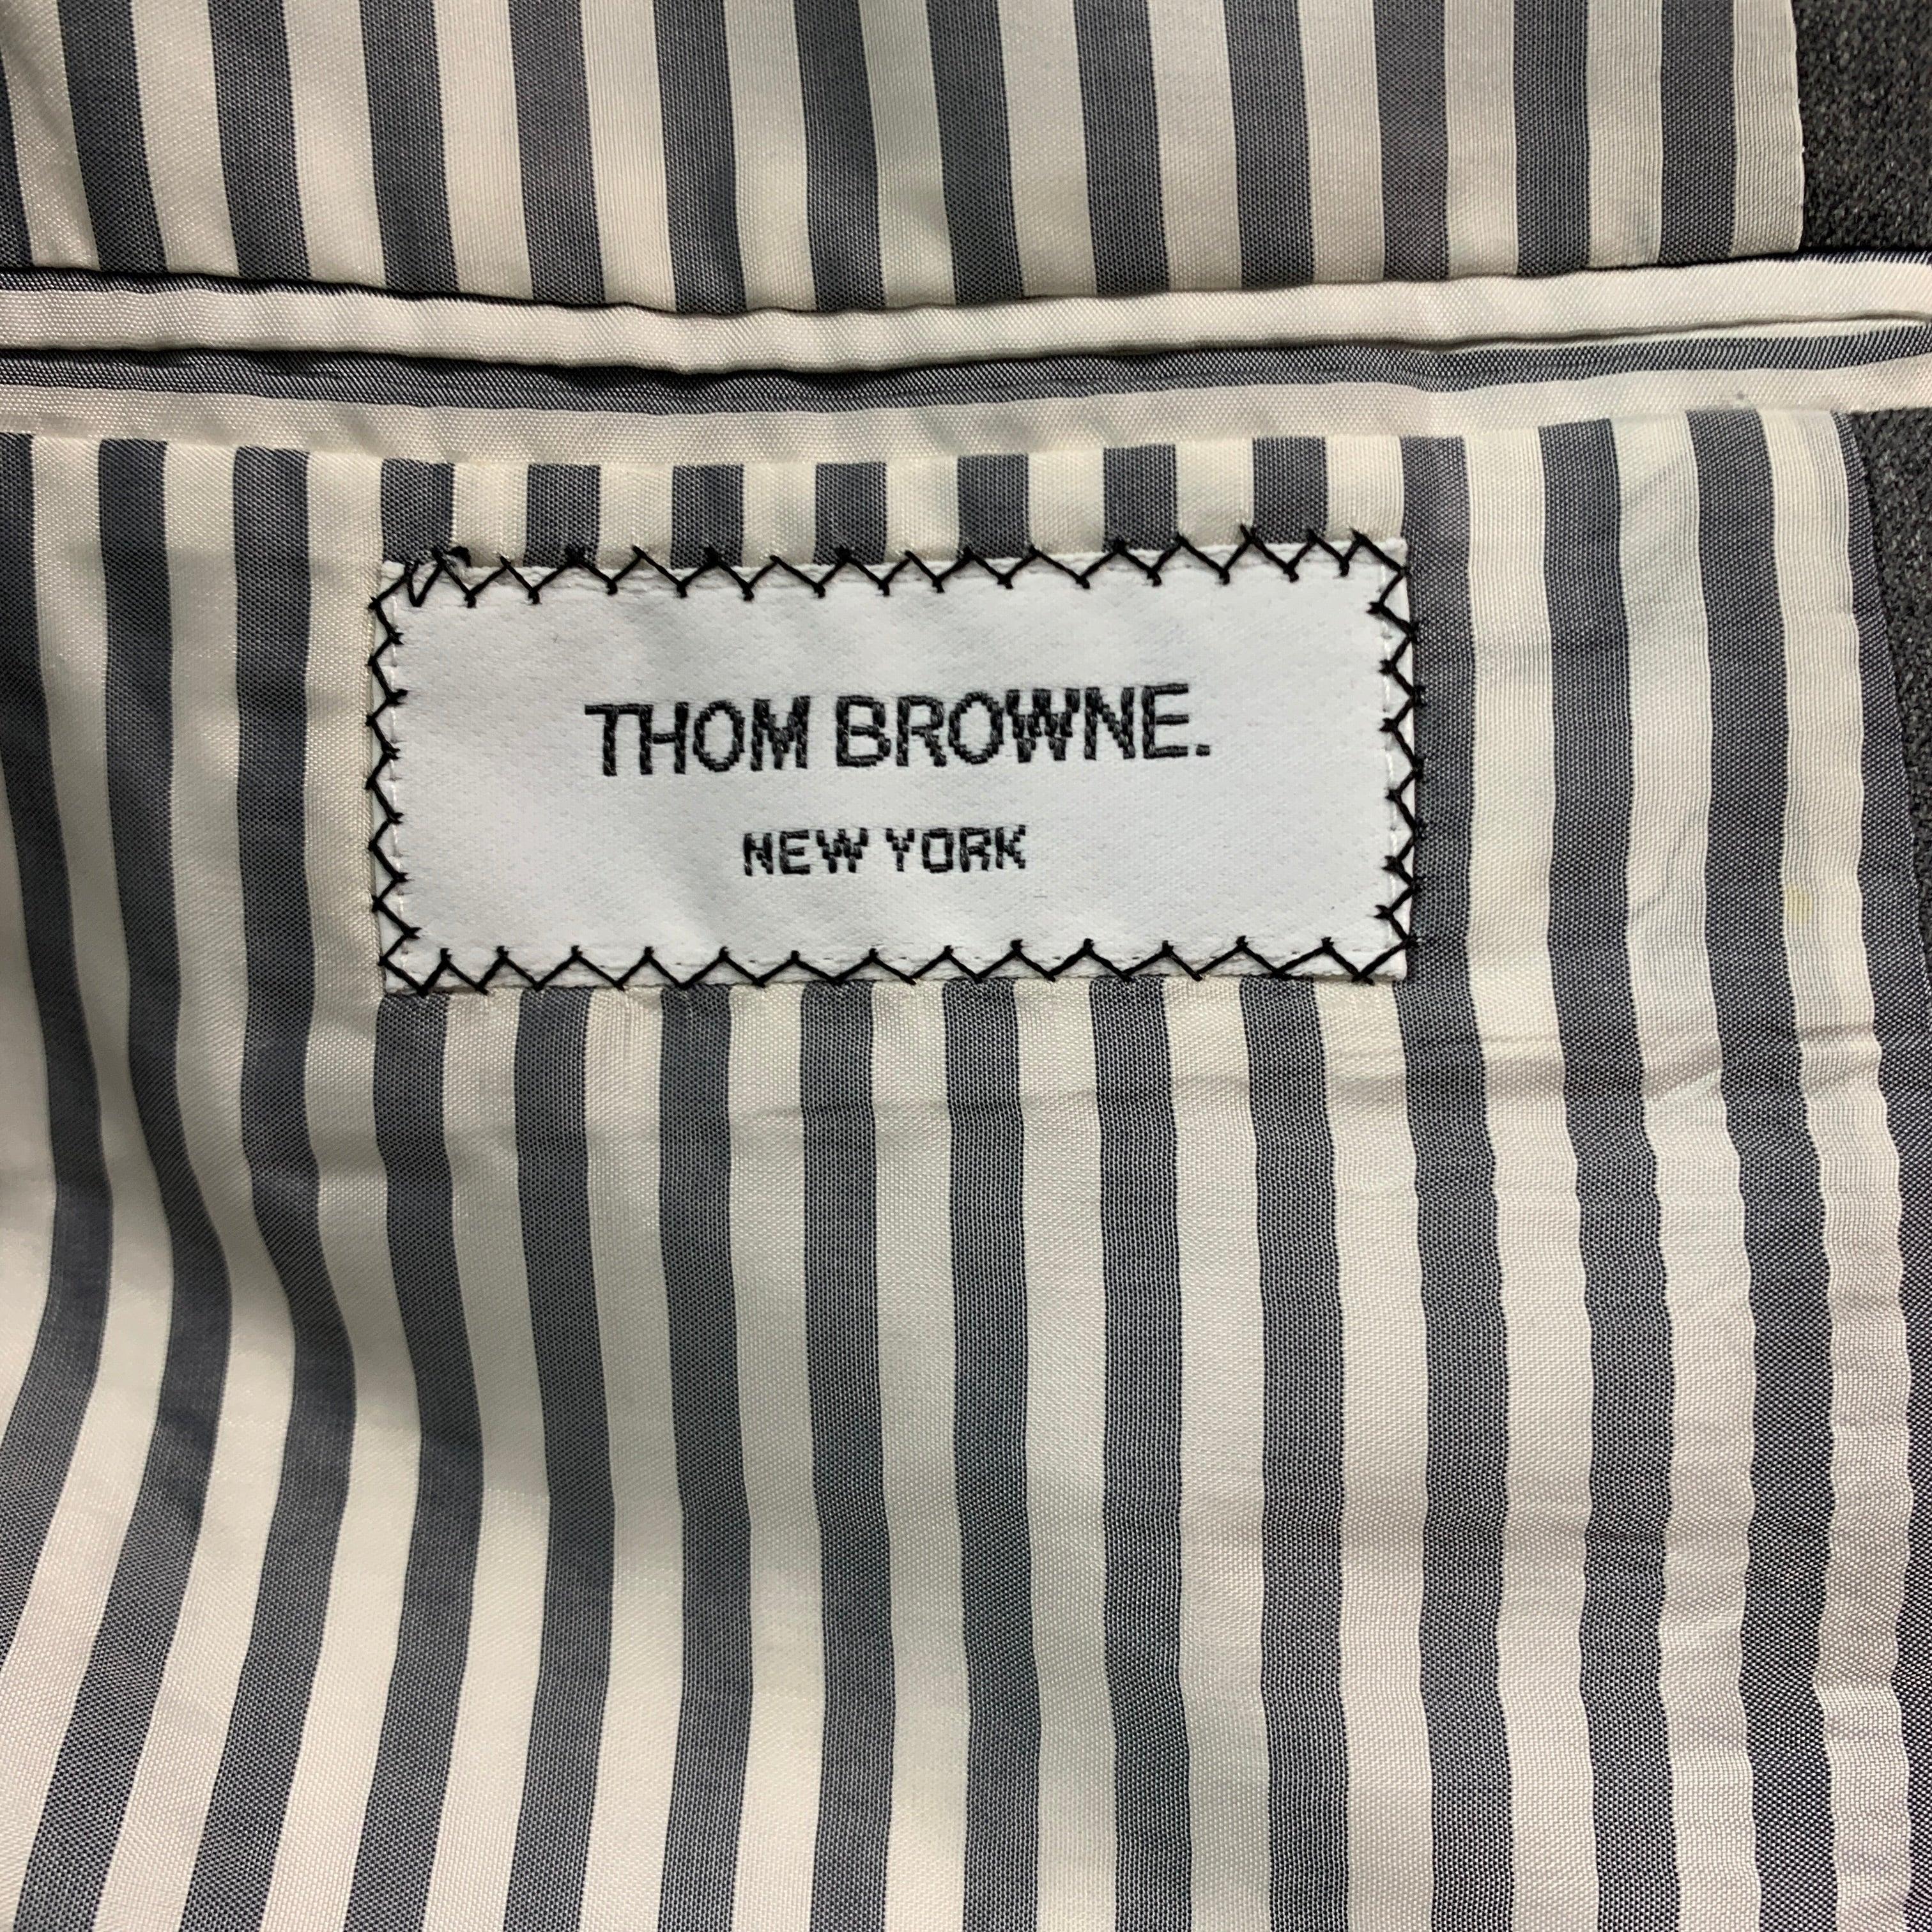 THOM BROWNE Size 40 Grey Tweed 3 button Sport Coat For Sale 1